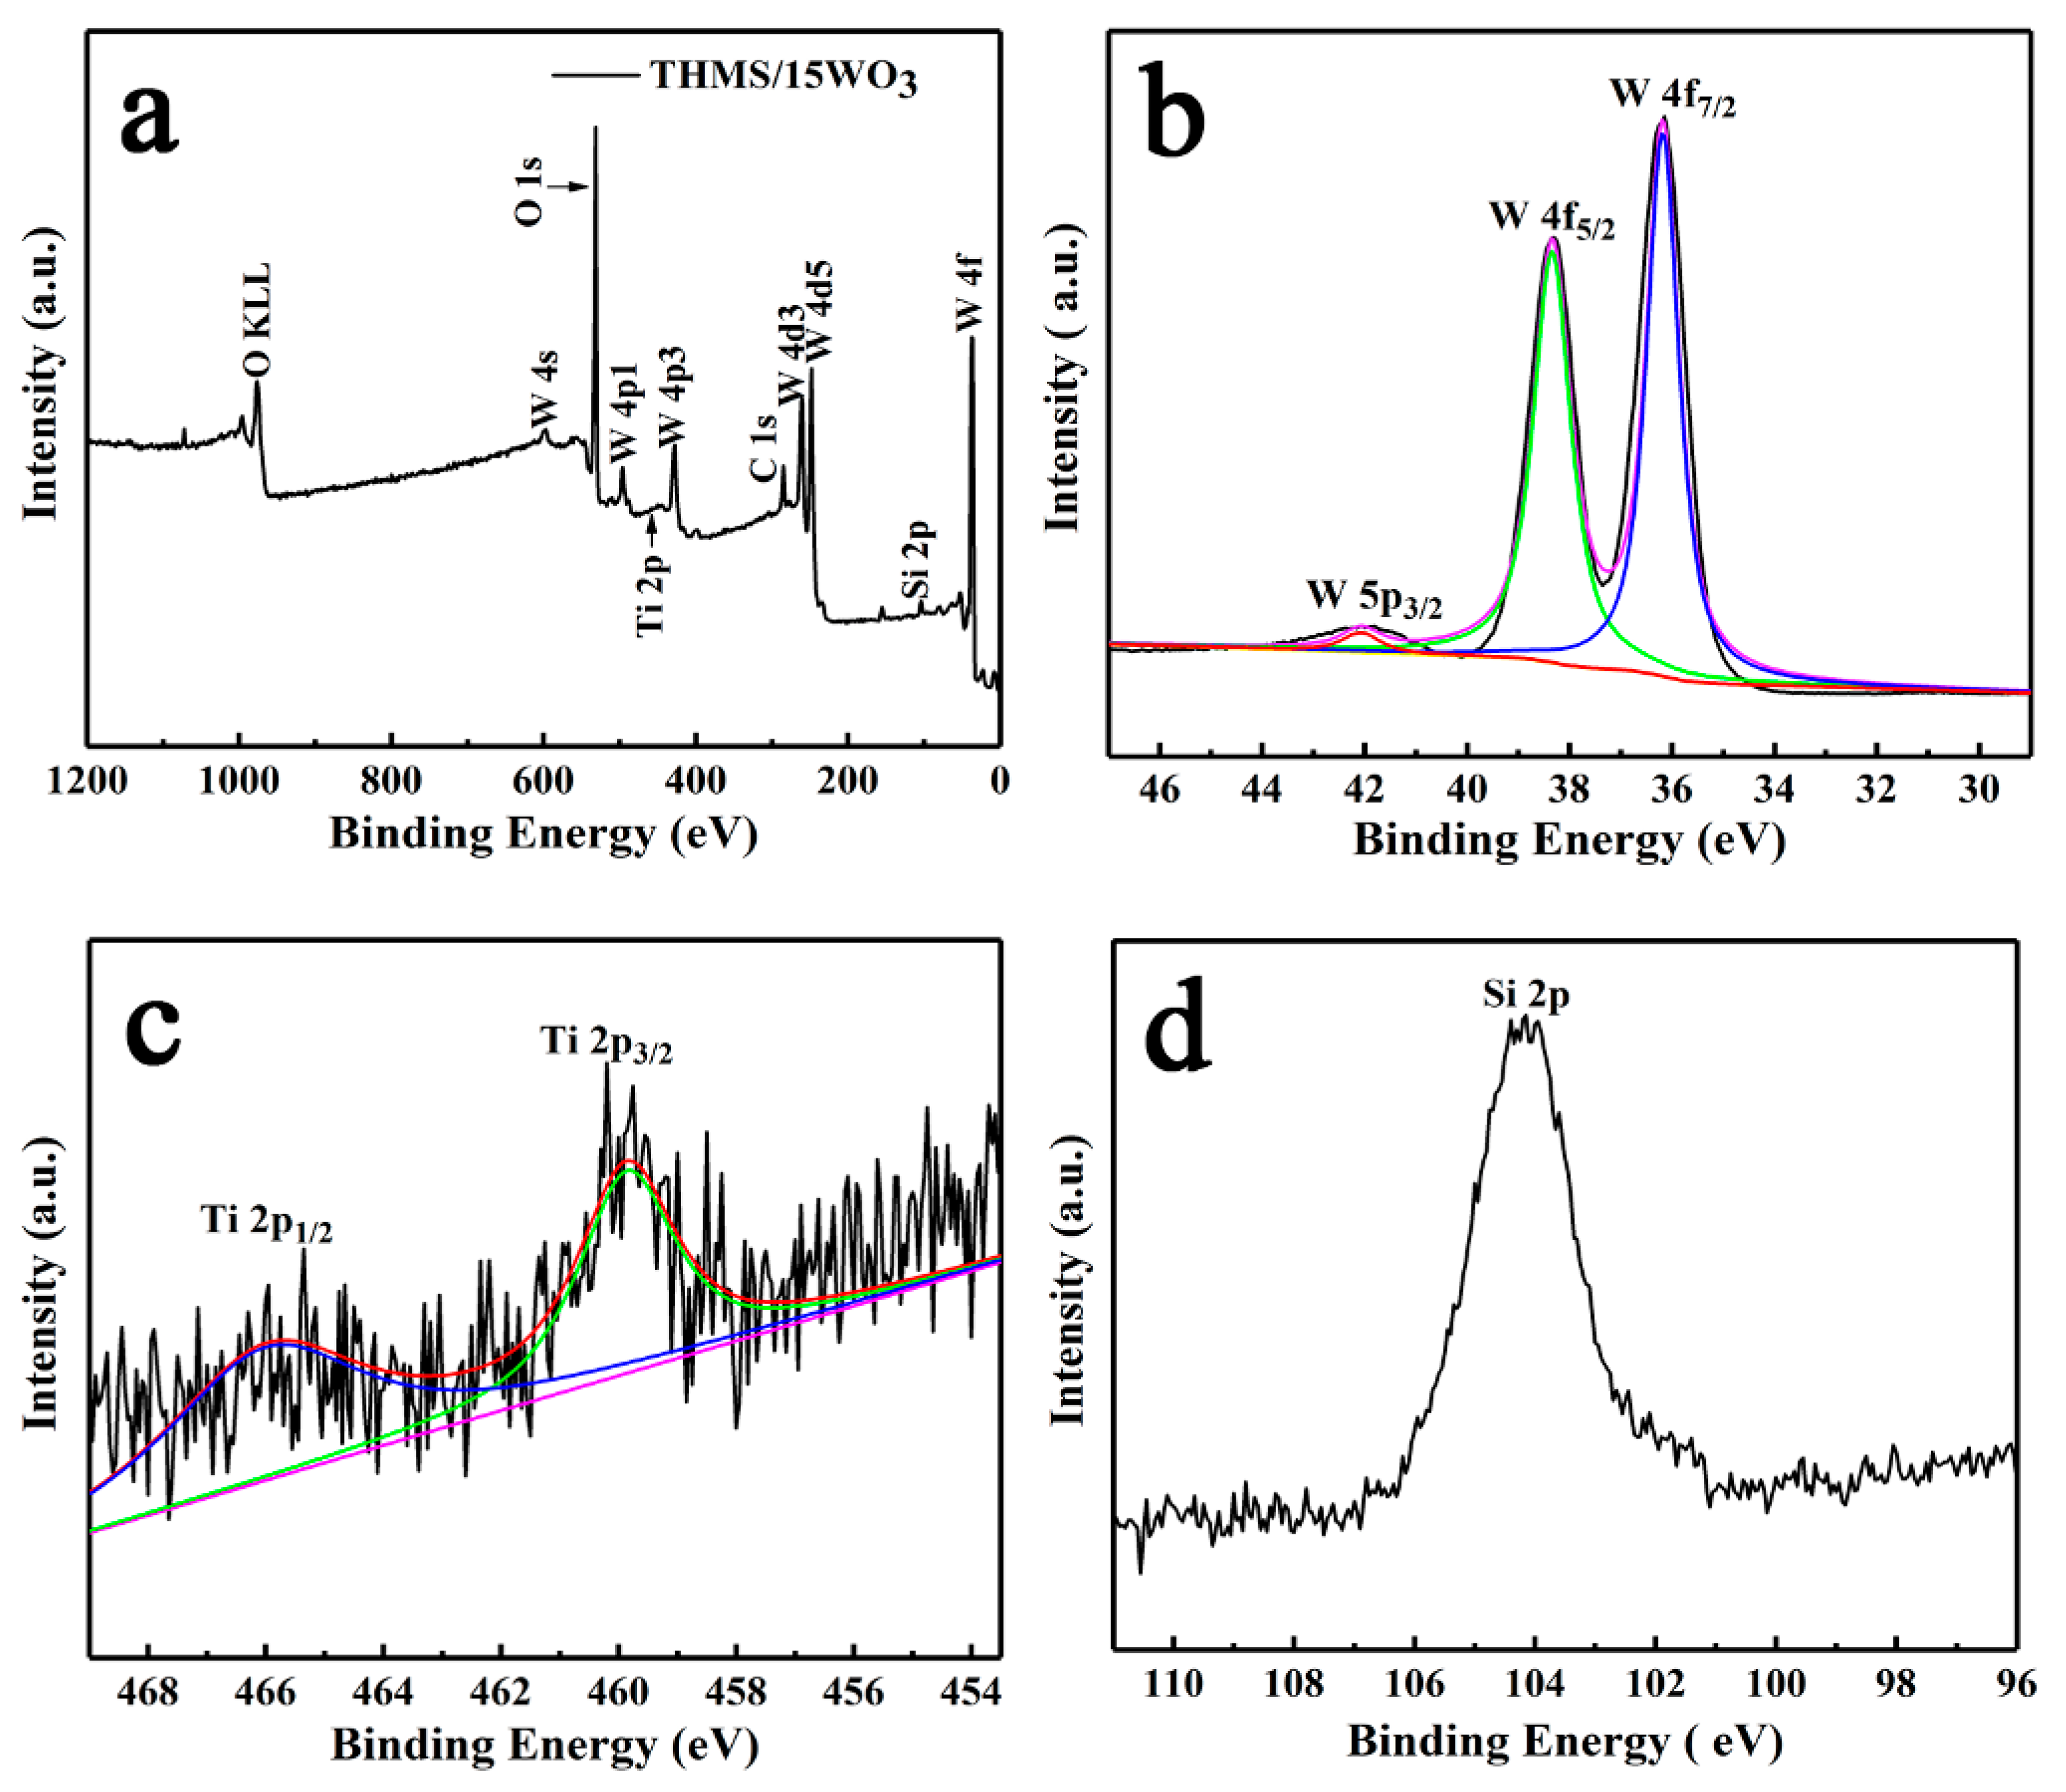 Synthesis and Capacitive Properties of Mesoporous Tungsten Oxide Films  Prepared by Ultrasonic Spray Deposition